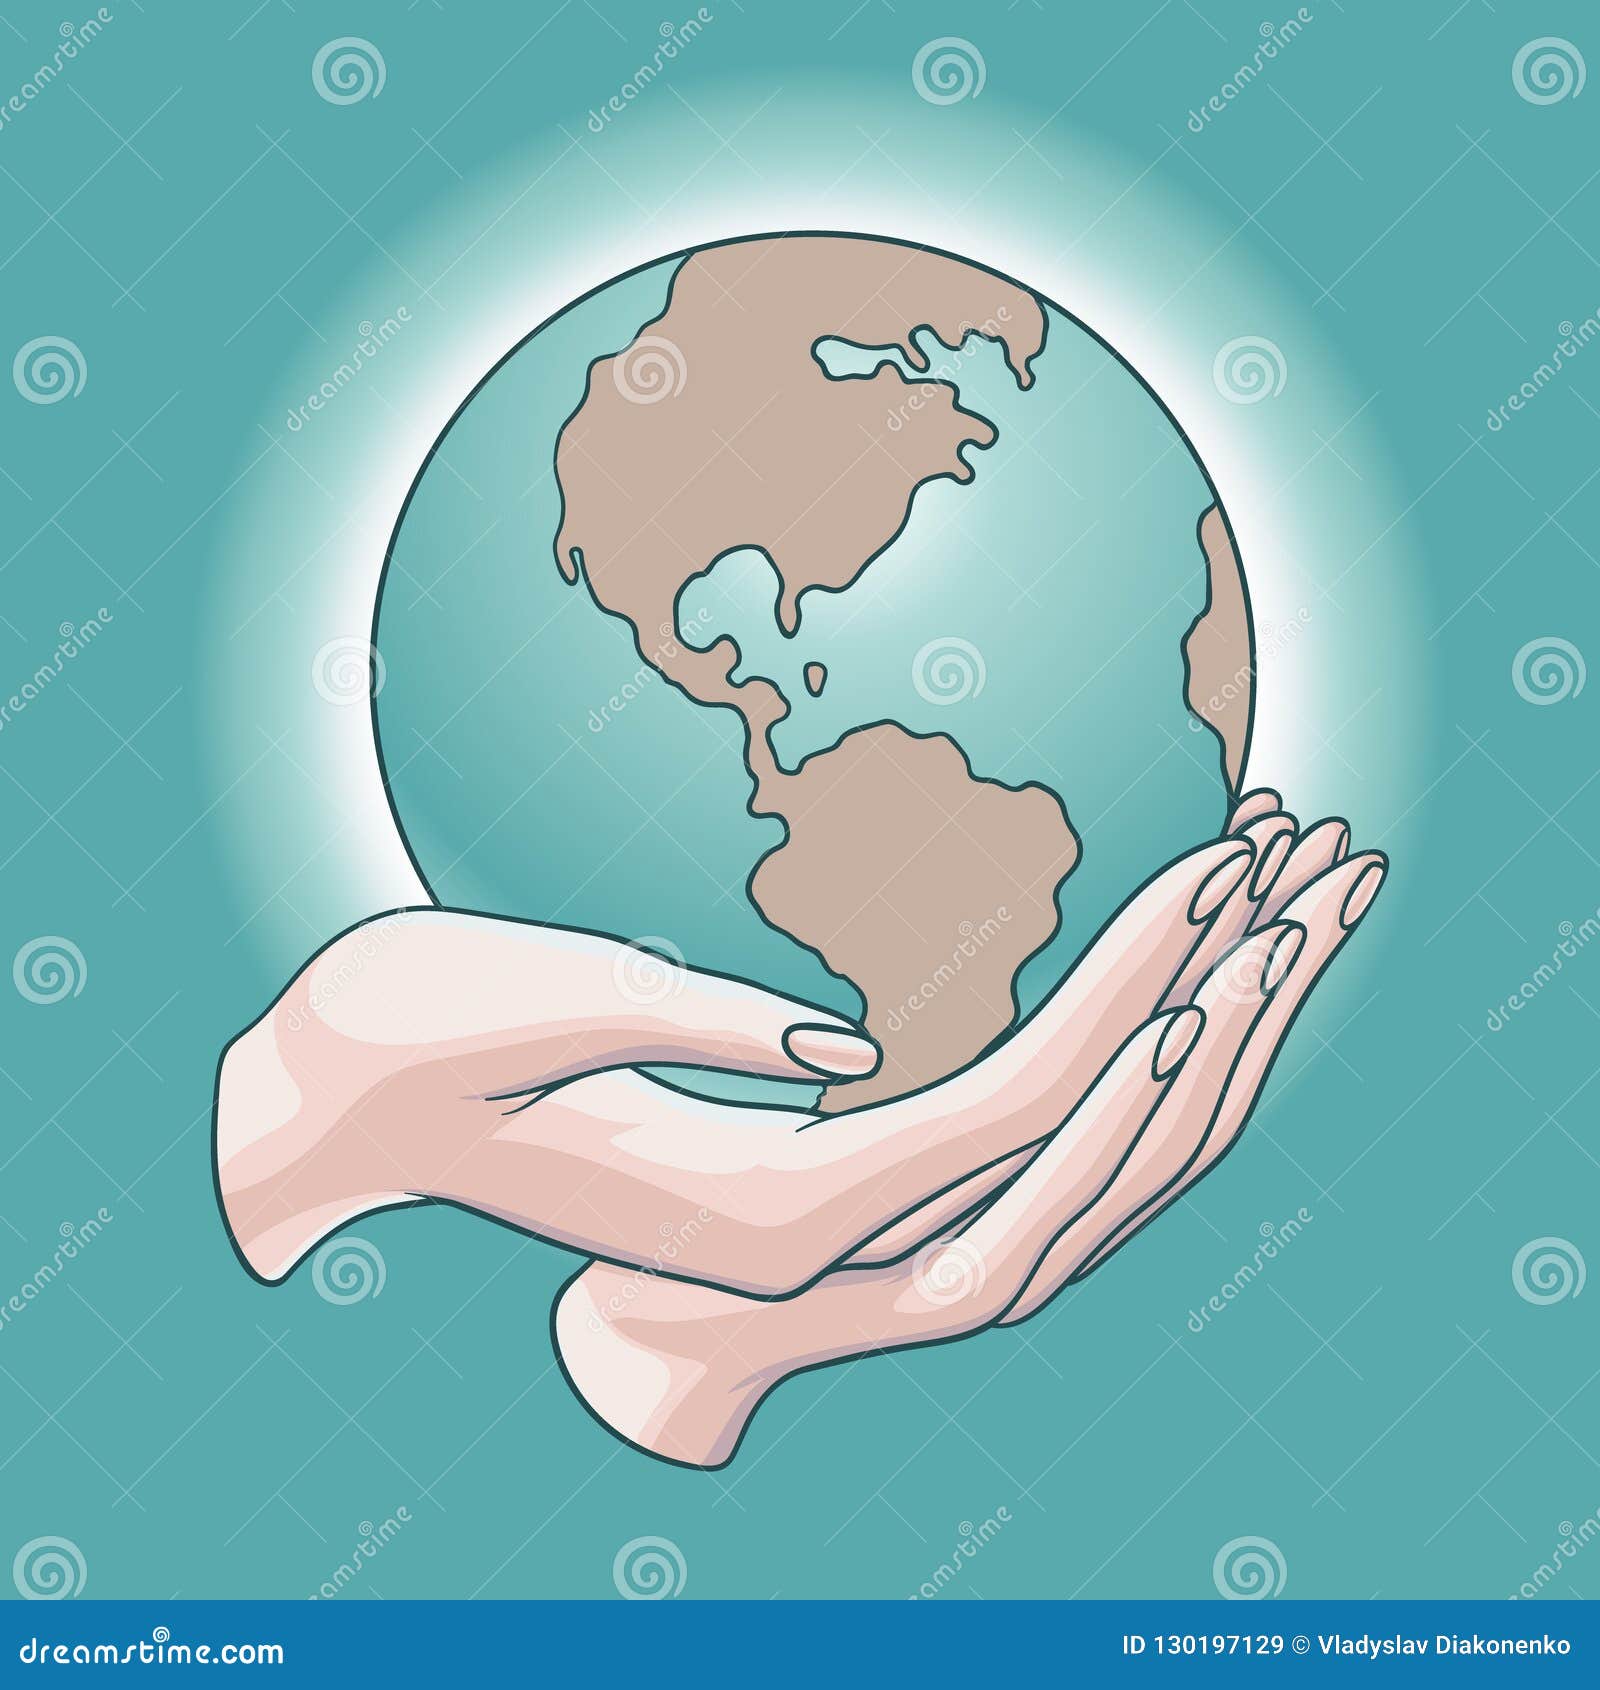 Earth Sketch Vector Art, Icons, and Graphics for Free Download